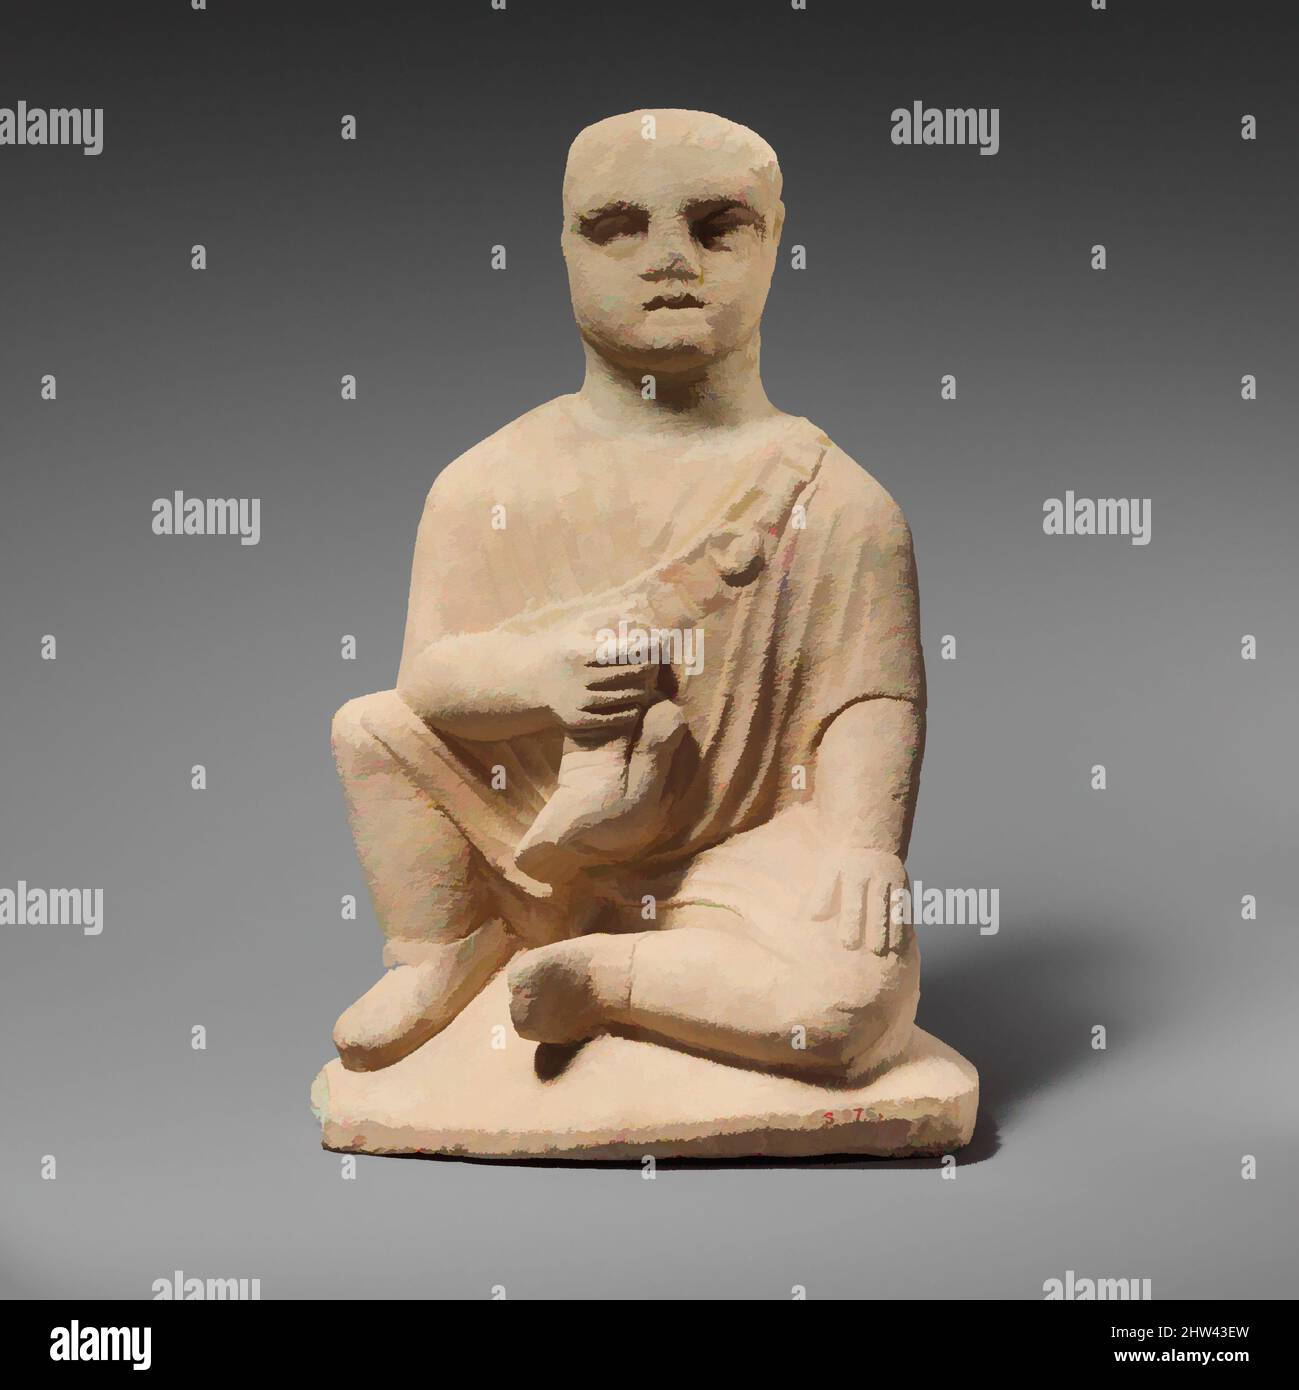 Art inspired by Limestone statuette of a temple boy, Hellenistic, 4th–3rd century B.C., Cypriot, Limestone, Overall: 12 3/4 x 8 3/4 x 6 1/8 in. (32.4 x 22.2 x 15.6 cm), Stone Sculpture, Figure with chain of pendants over left shoulder, holding a dove, Classic works modernized by Artotop with a splash of modernity. Shapes, color and value, eye-catching visual impact on art. Emotions through freedom of artworks in a contemporary way. A timeless message pursuing a wildly creative new direction. Artists turning to the digital medium and creating the Artotop NFT Stock Photo